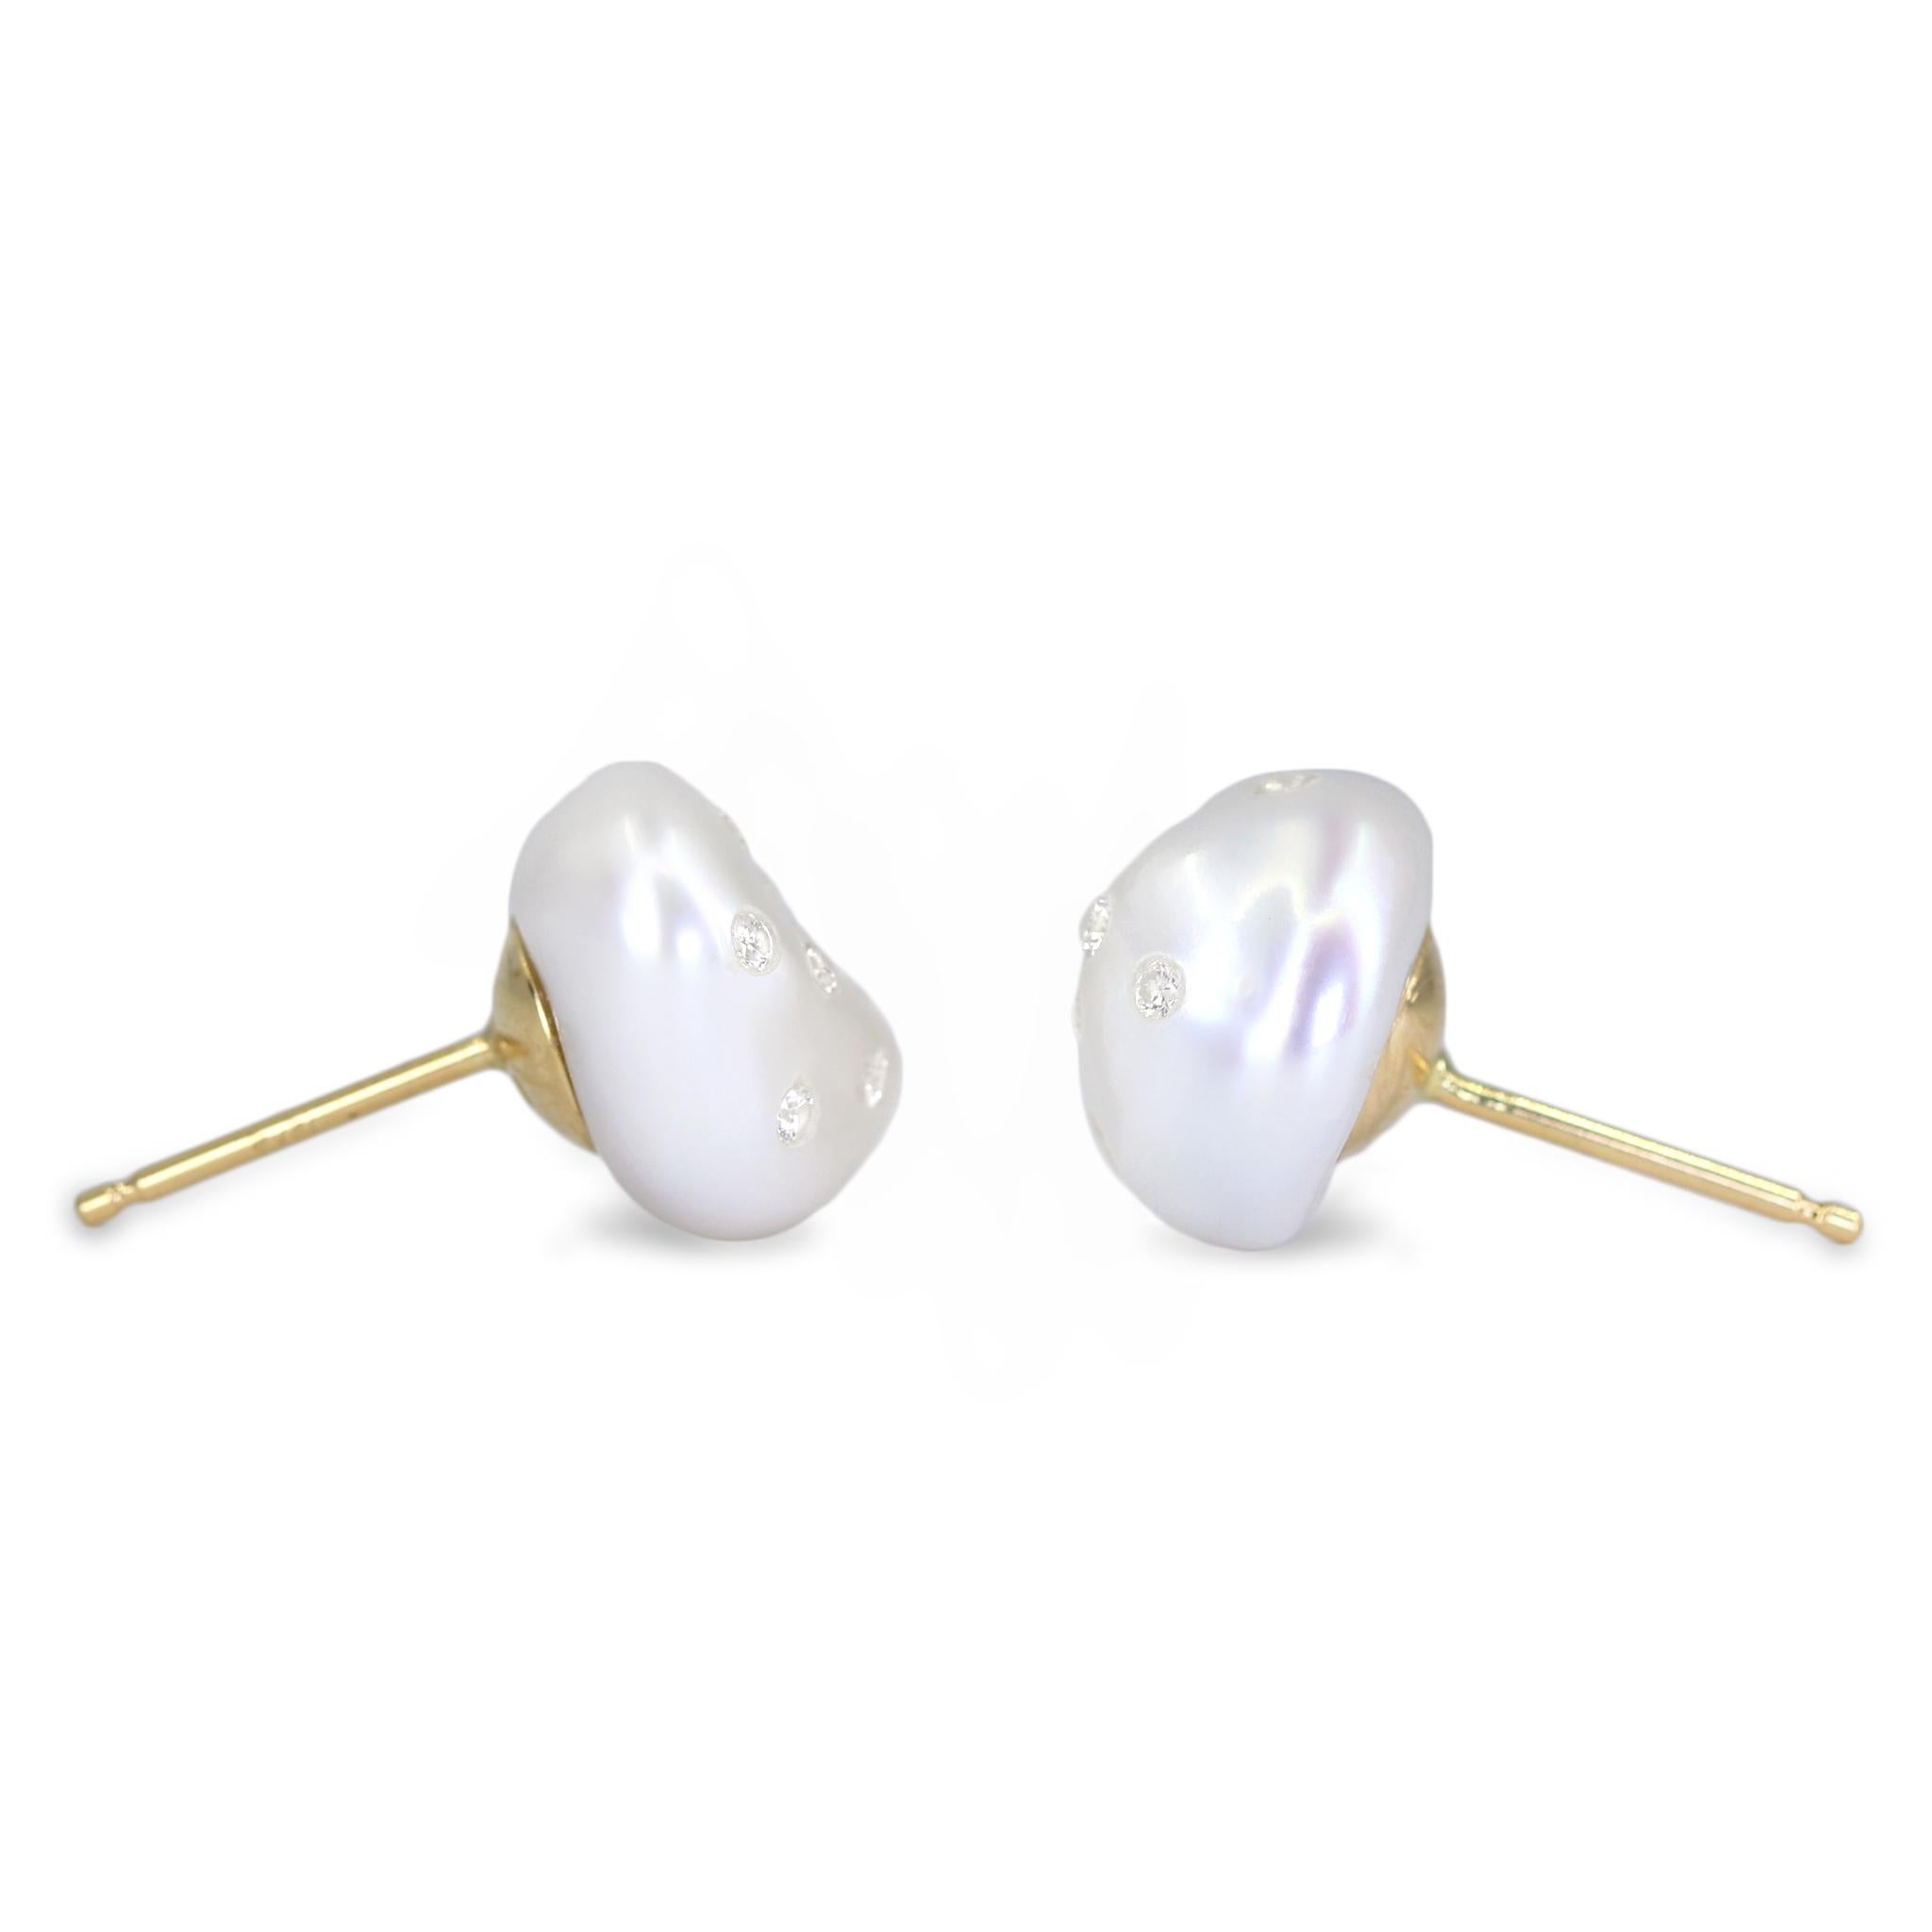 One-of-a-Kind Baroque Keshi Pearl Stud Earrings with 0.32 total carats of embedded round brilliant-cut white diamonds and with 18k yellow gold cupped posts and jumbo 14k yellow backs. Stamped 18k / 14k. 

About the Maker - Russell Trusso was a